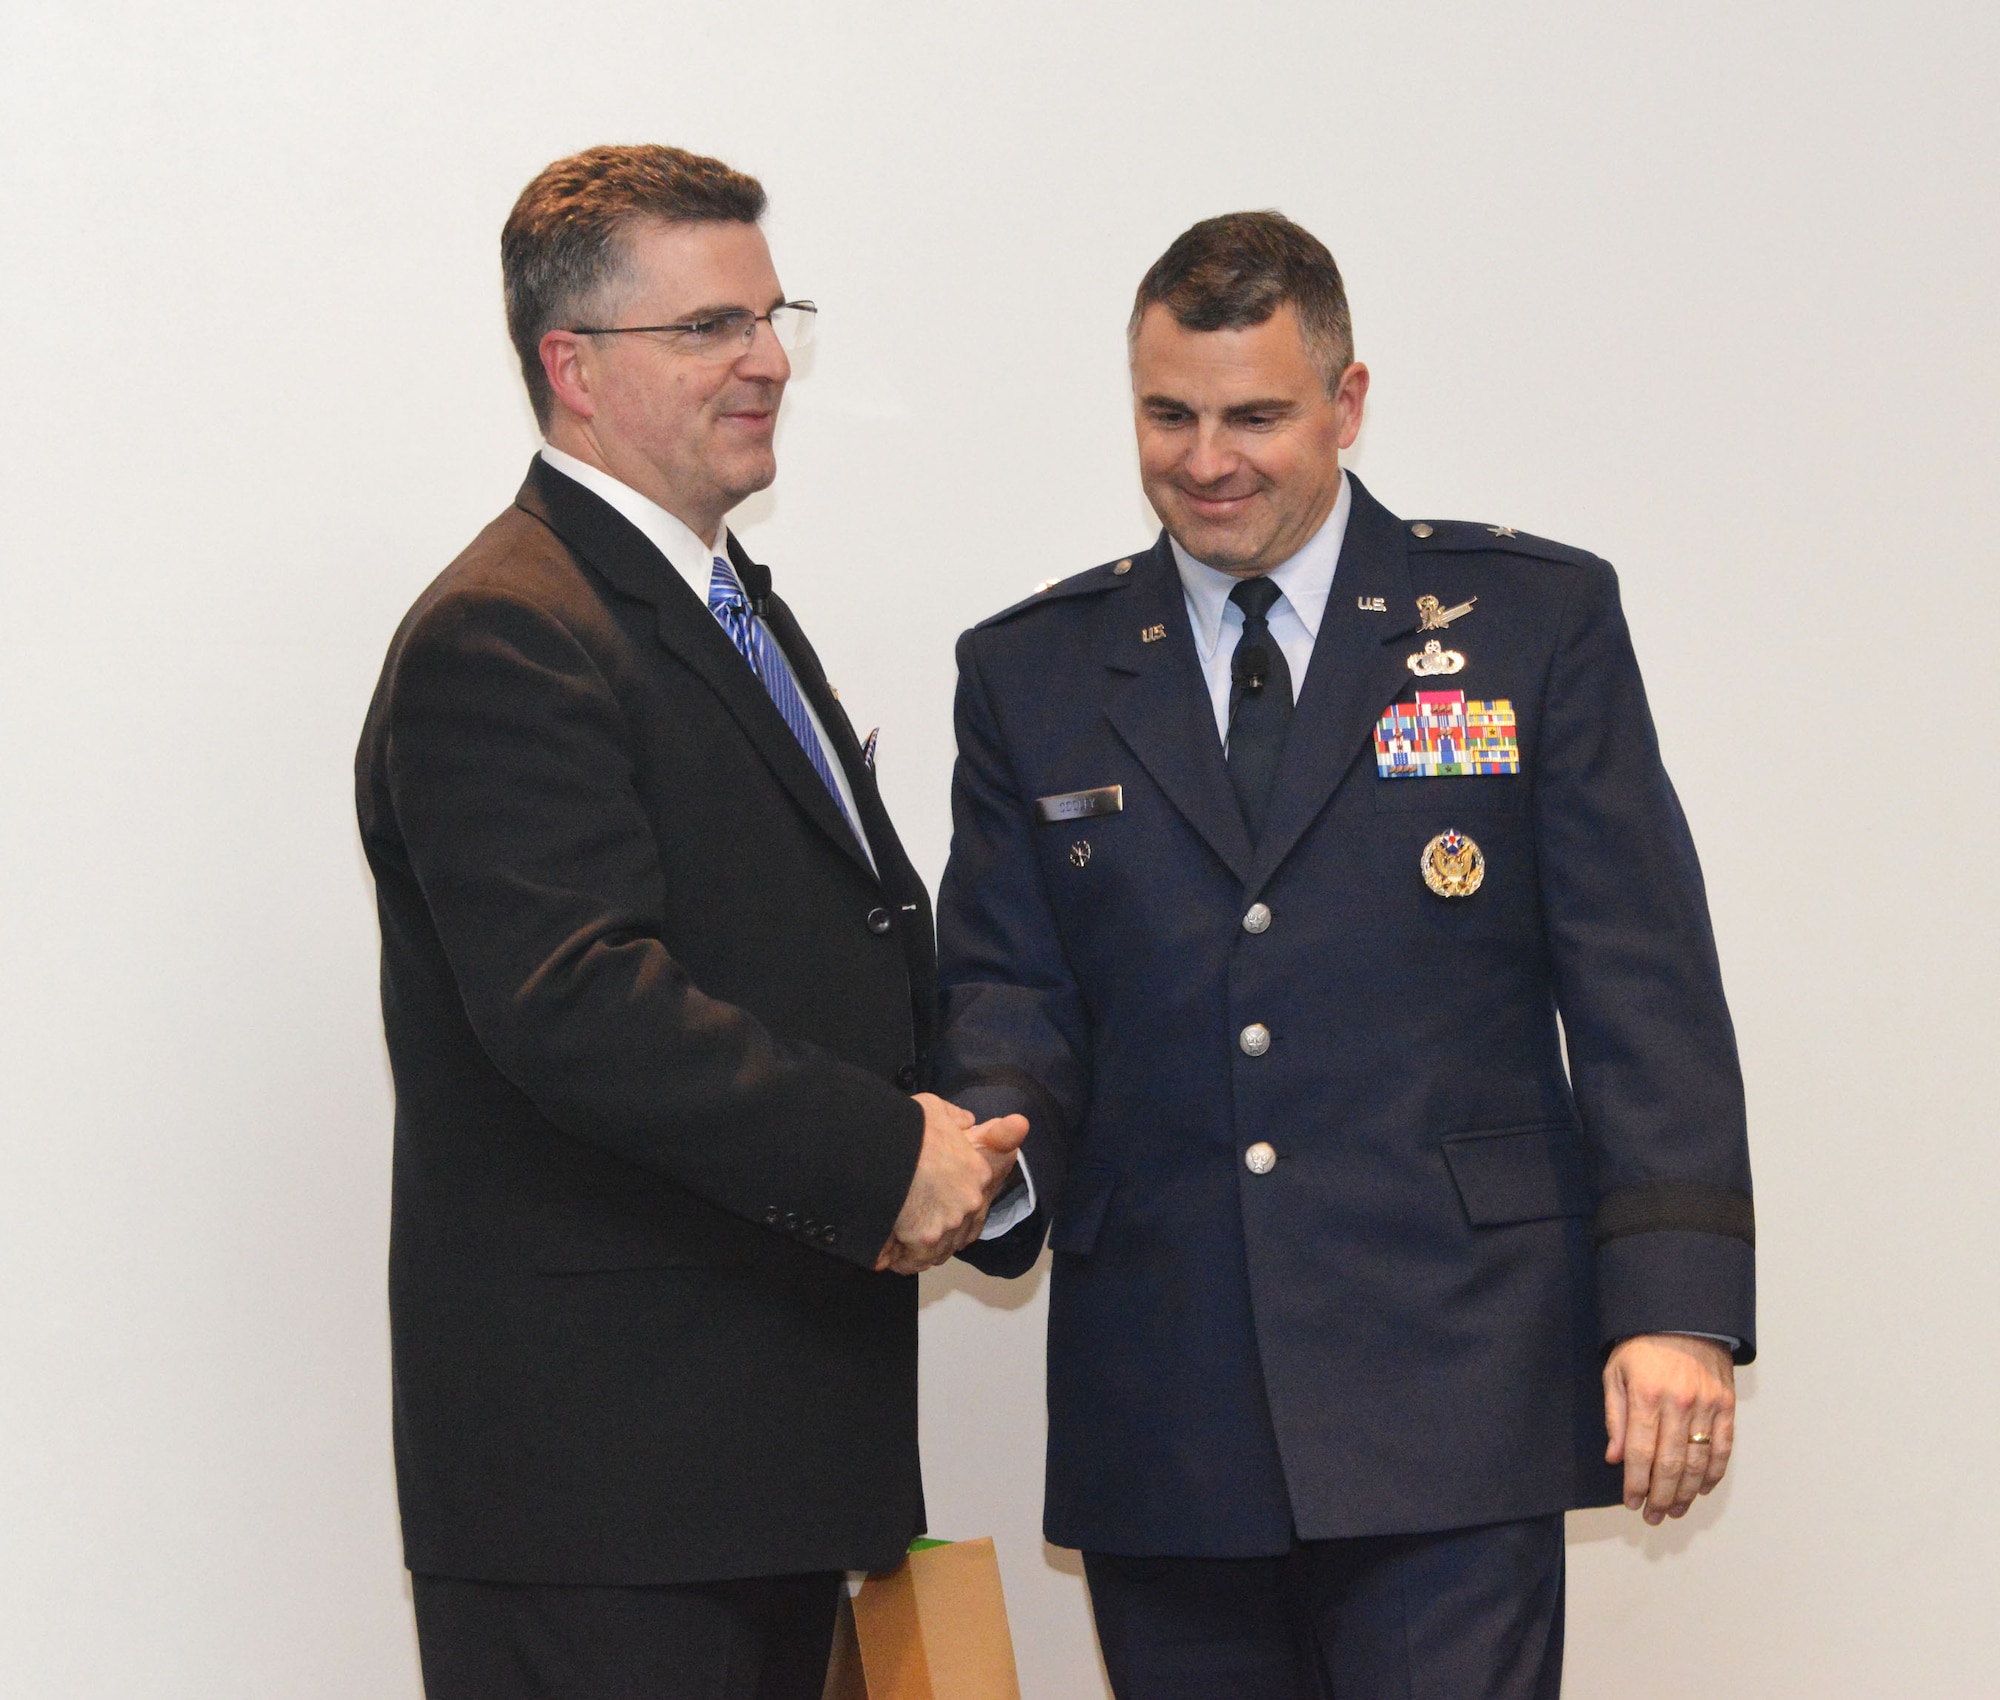 At his promotion ceremony Tom Cooley, left, shakes hands with his brother, Brig. Gen. William Cooley. Tom was promoted to an ST, or scientific professional, the highest rank a technical leader can achieve, considered to be the civilian equivalent of general. (Photo by Dennis Carlson)